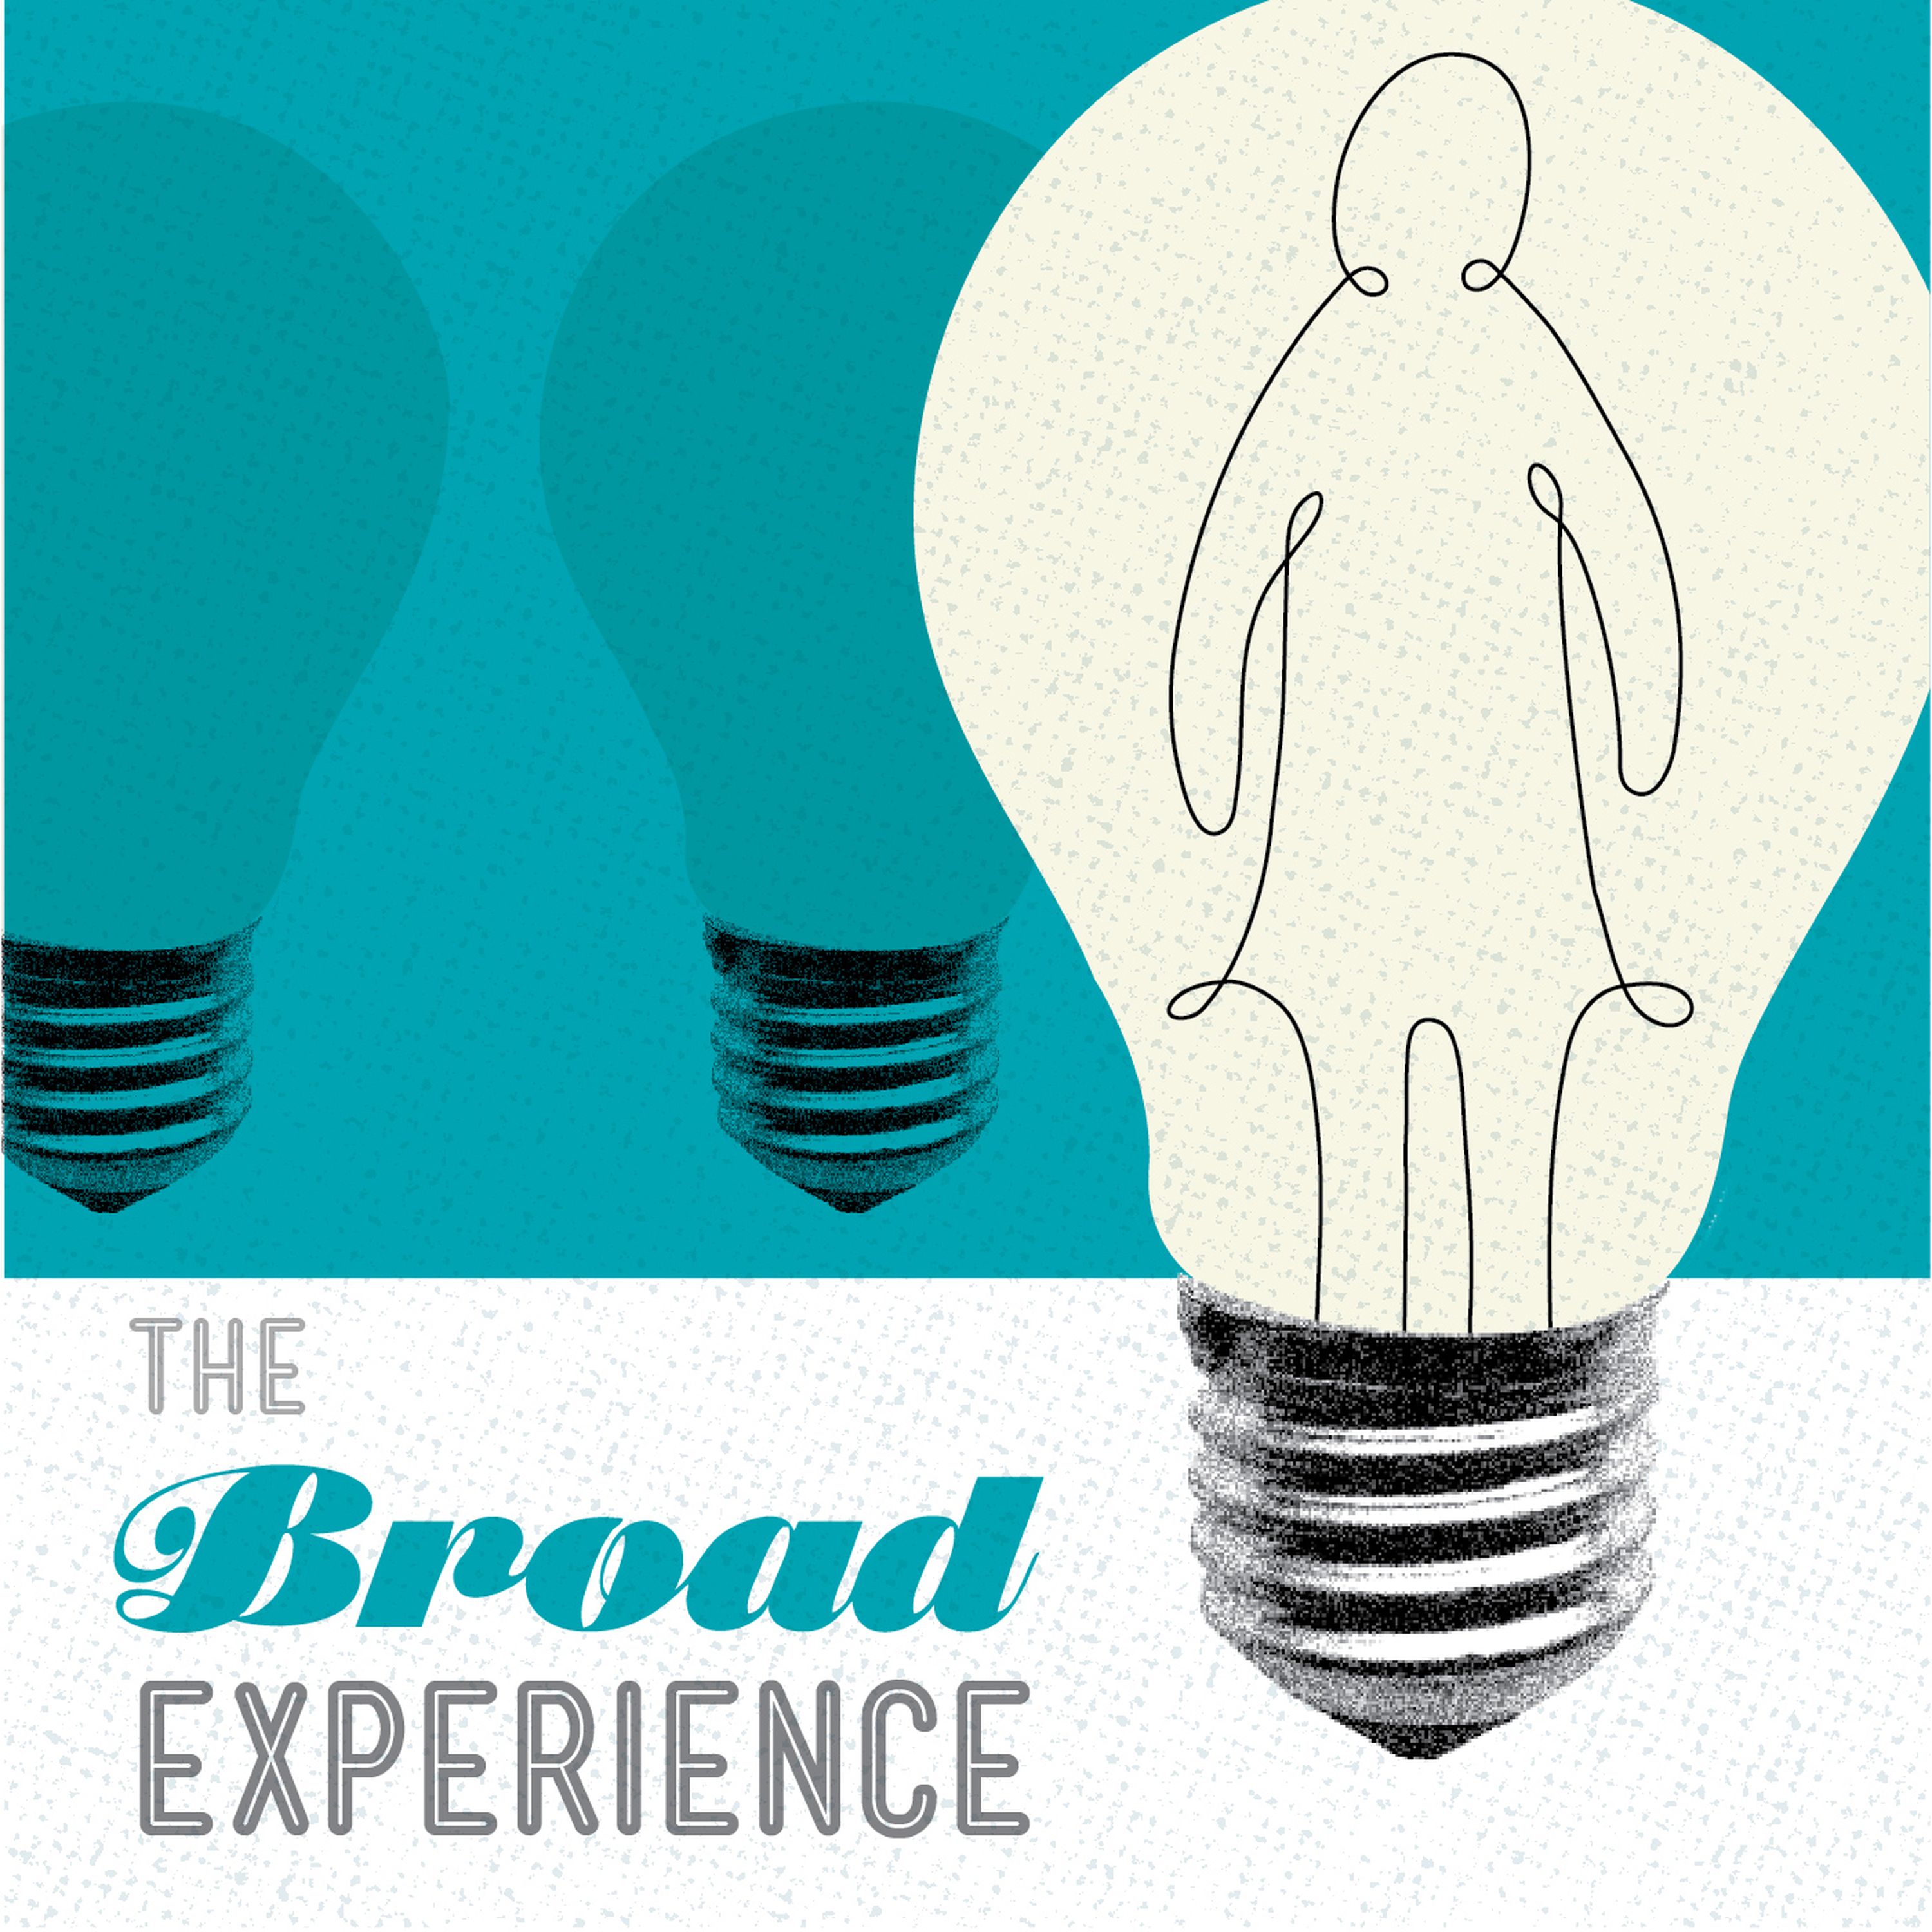 The Broad Experience 63: Getting your hands dirty